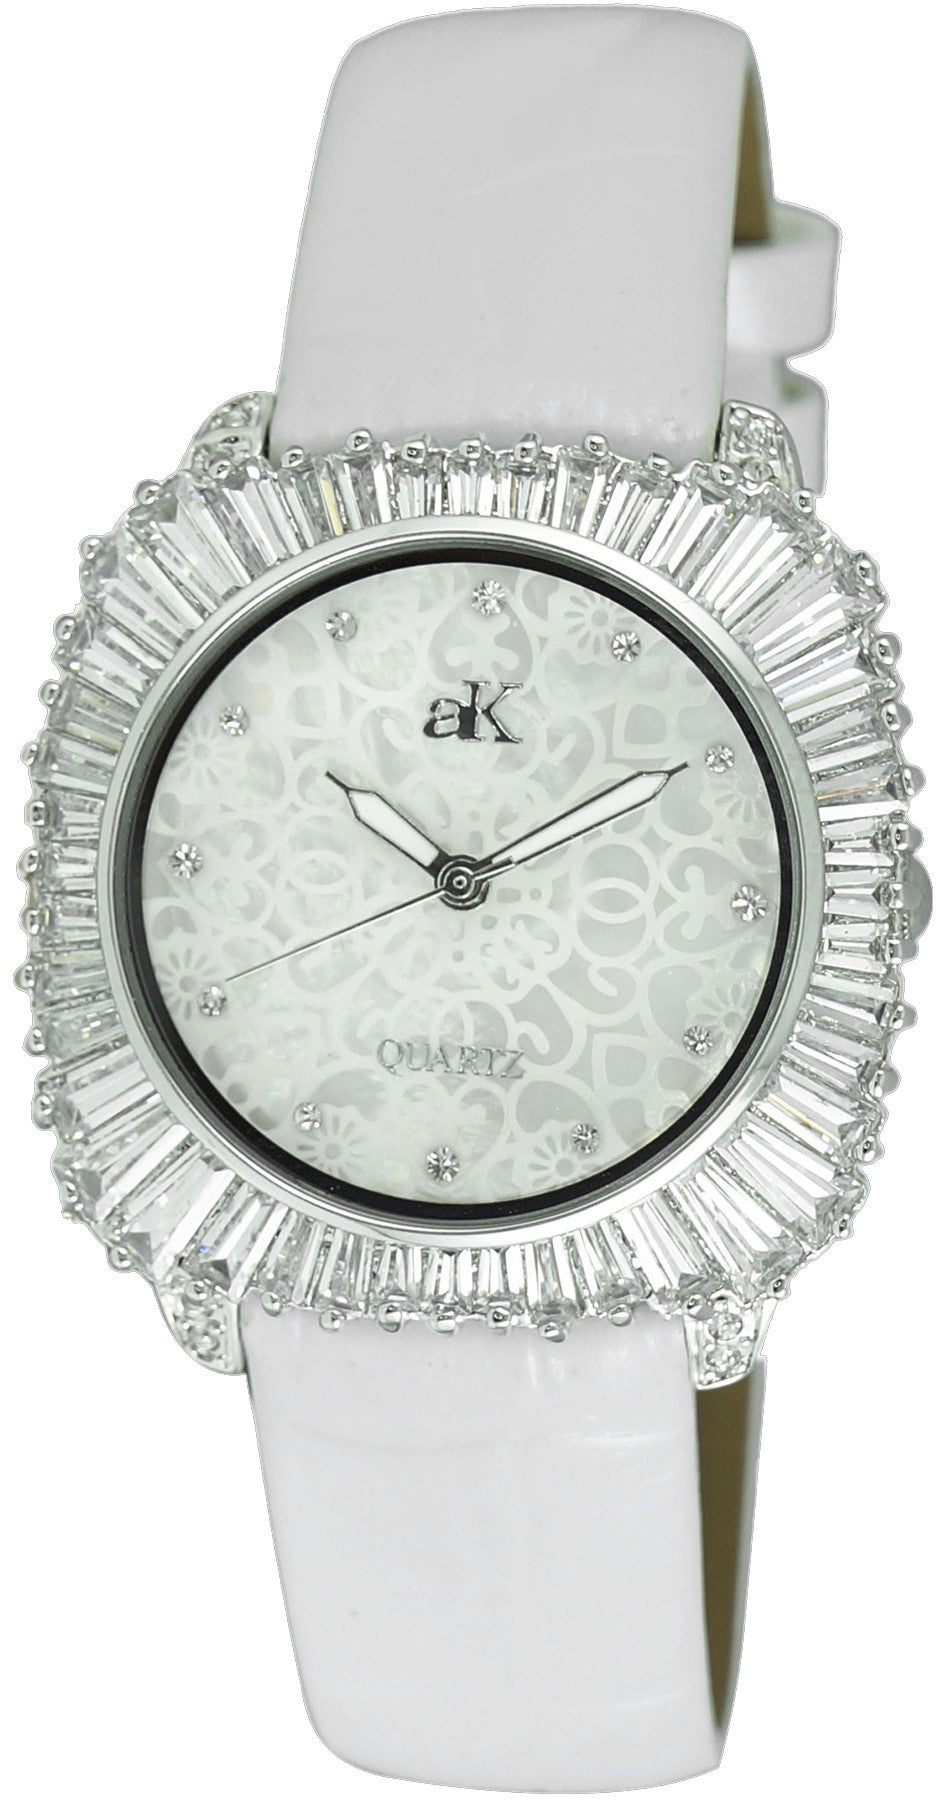 Adee Kaye Liberty - G2 Collection Crystal Accents Mother Of Pearl Dial Quartz Ak2722-s Women's Watch